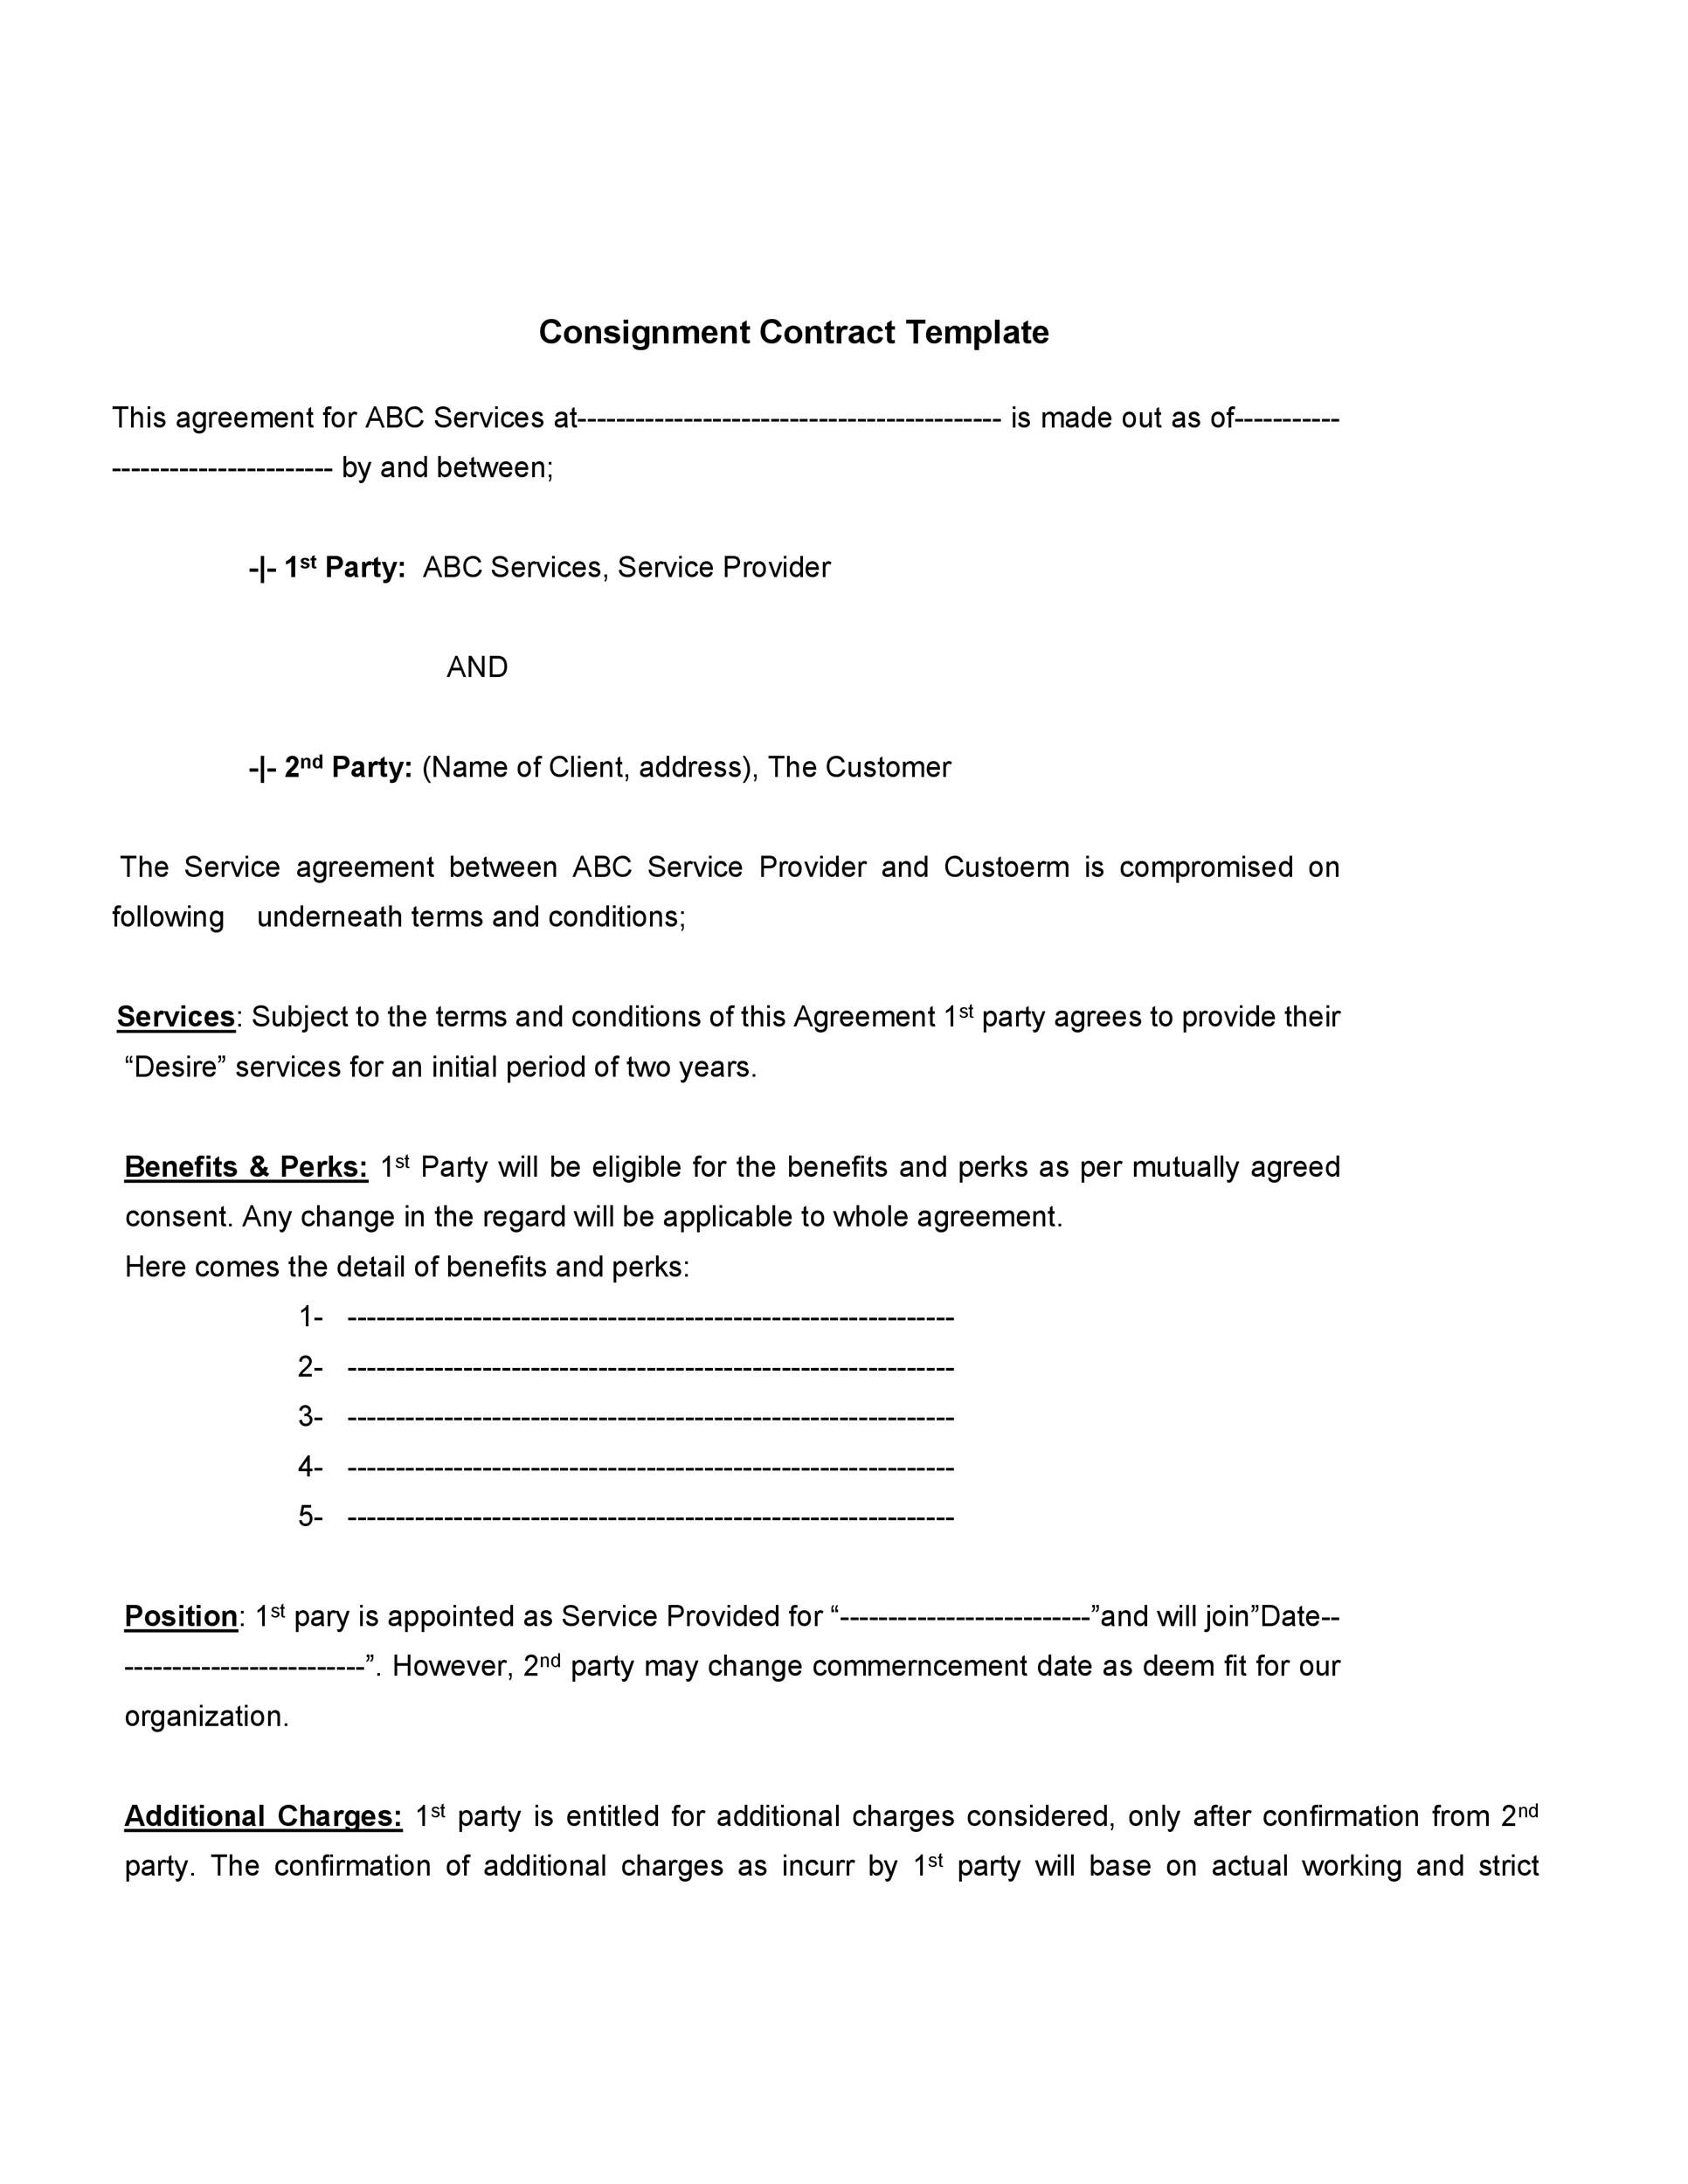 40+ Best Consignment Agreement Templates & Forms ᐅ TemplateLab NCGo